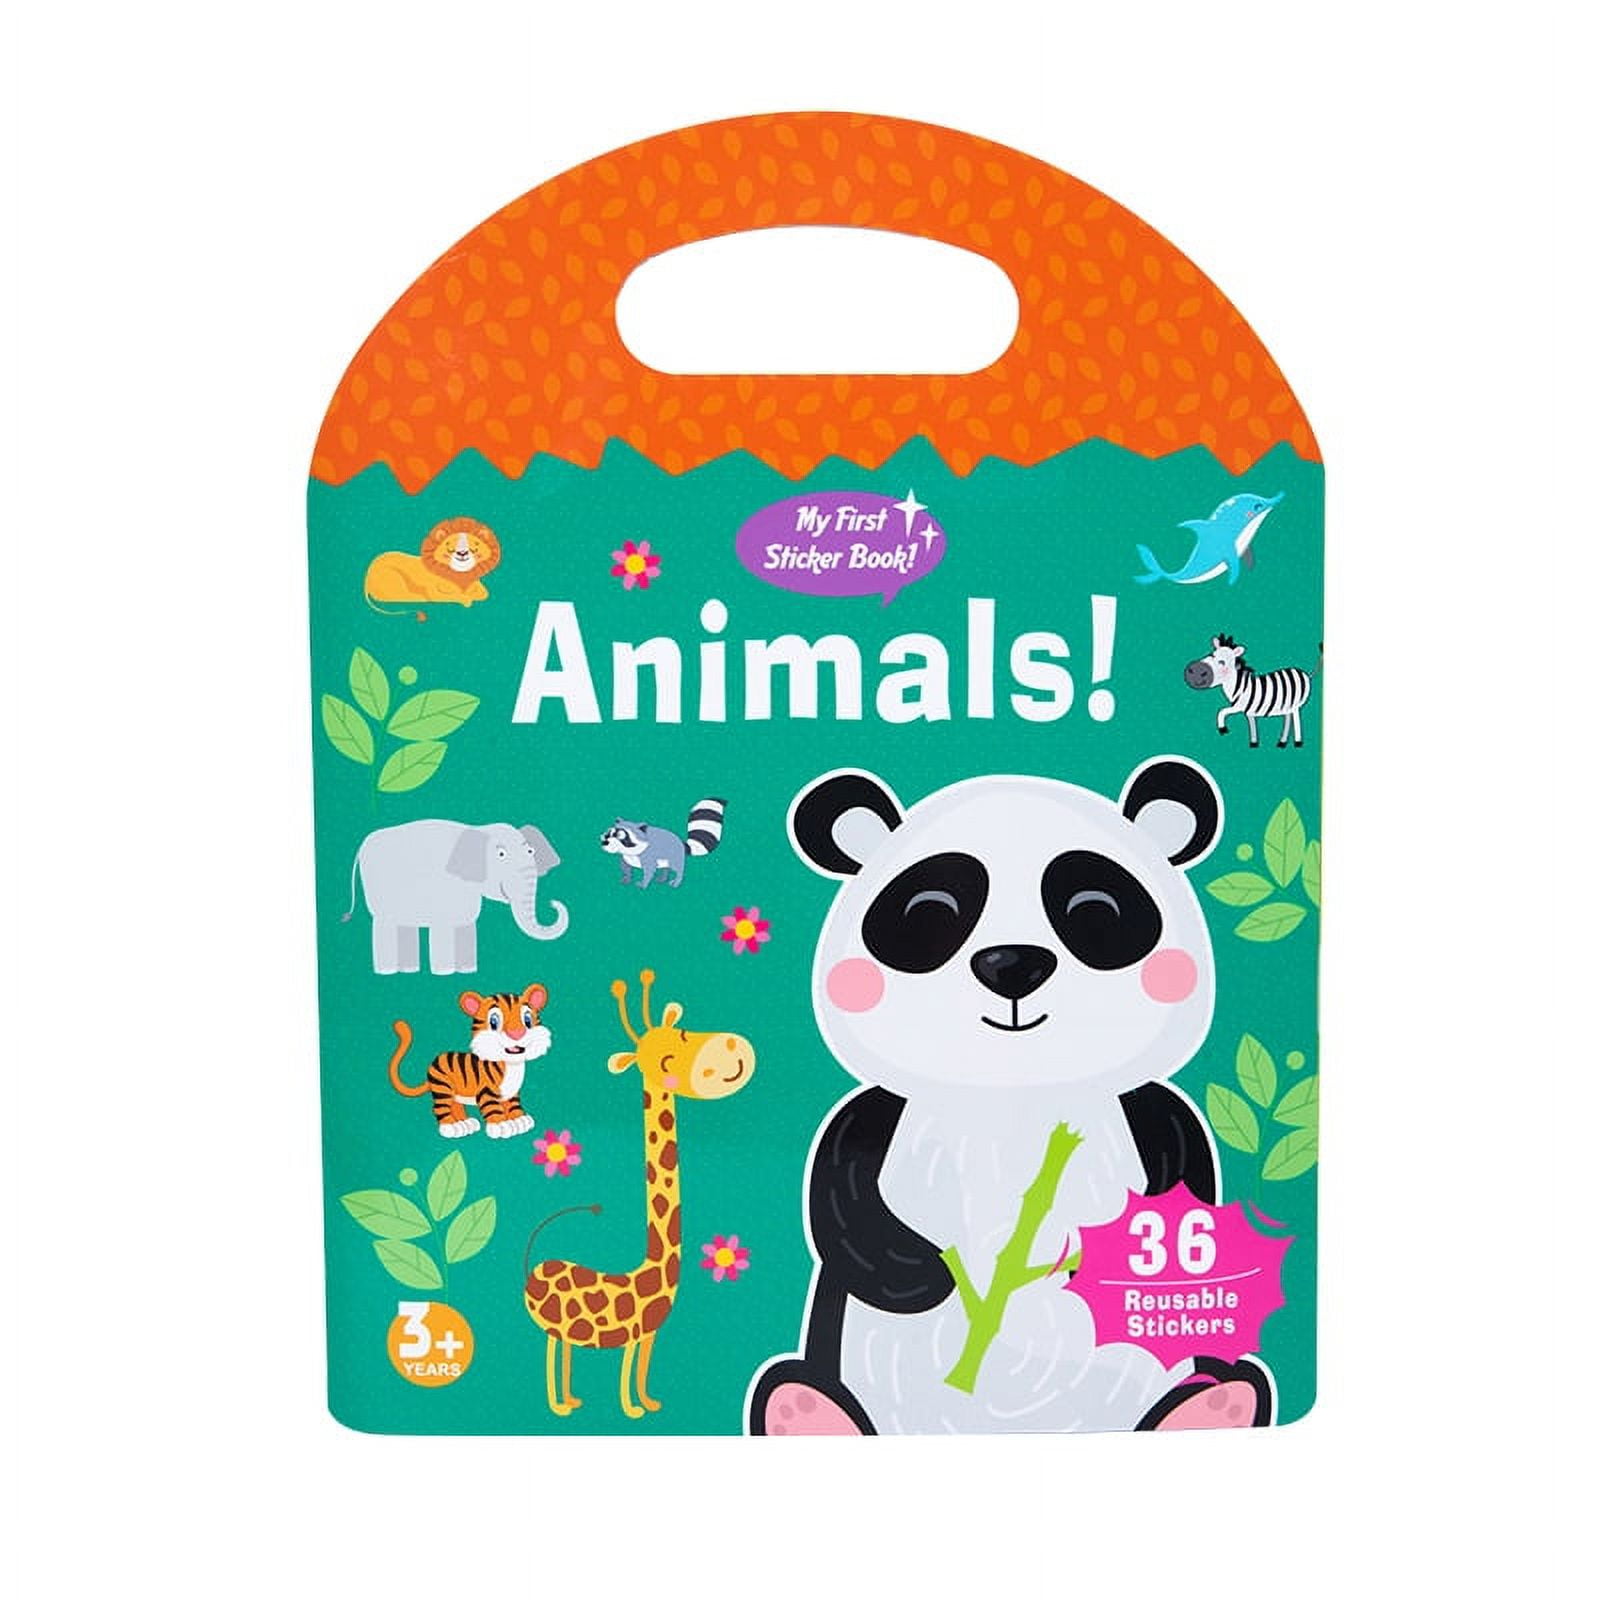 Sticker Books for Kids 2-4, Reusable Sticker Book Farm, Ocean and Animals  Theme Activity Books Stickers for Girls Boys Preschool Education Learning